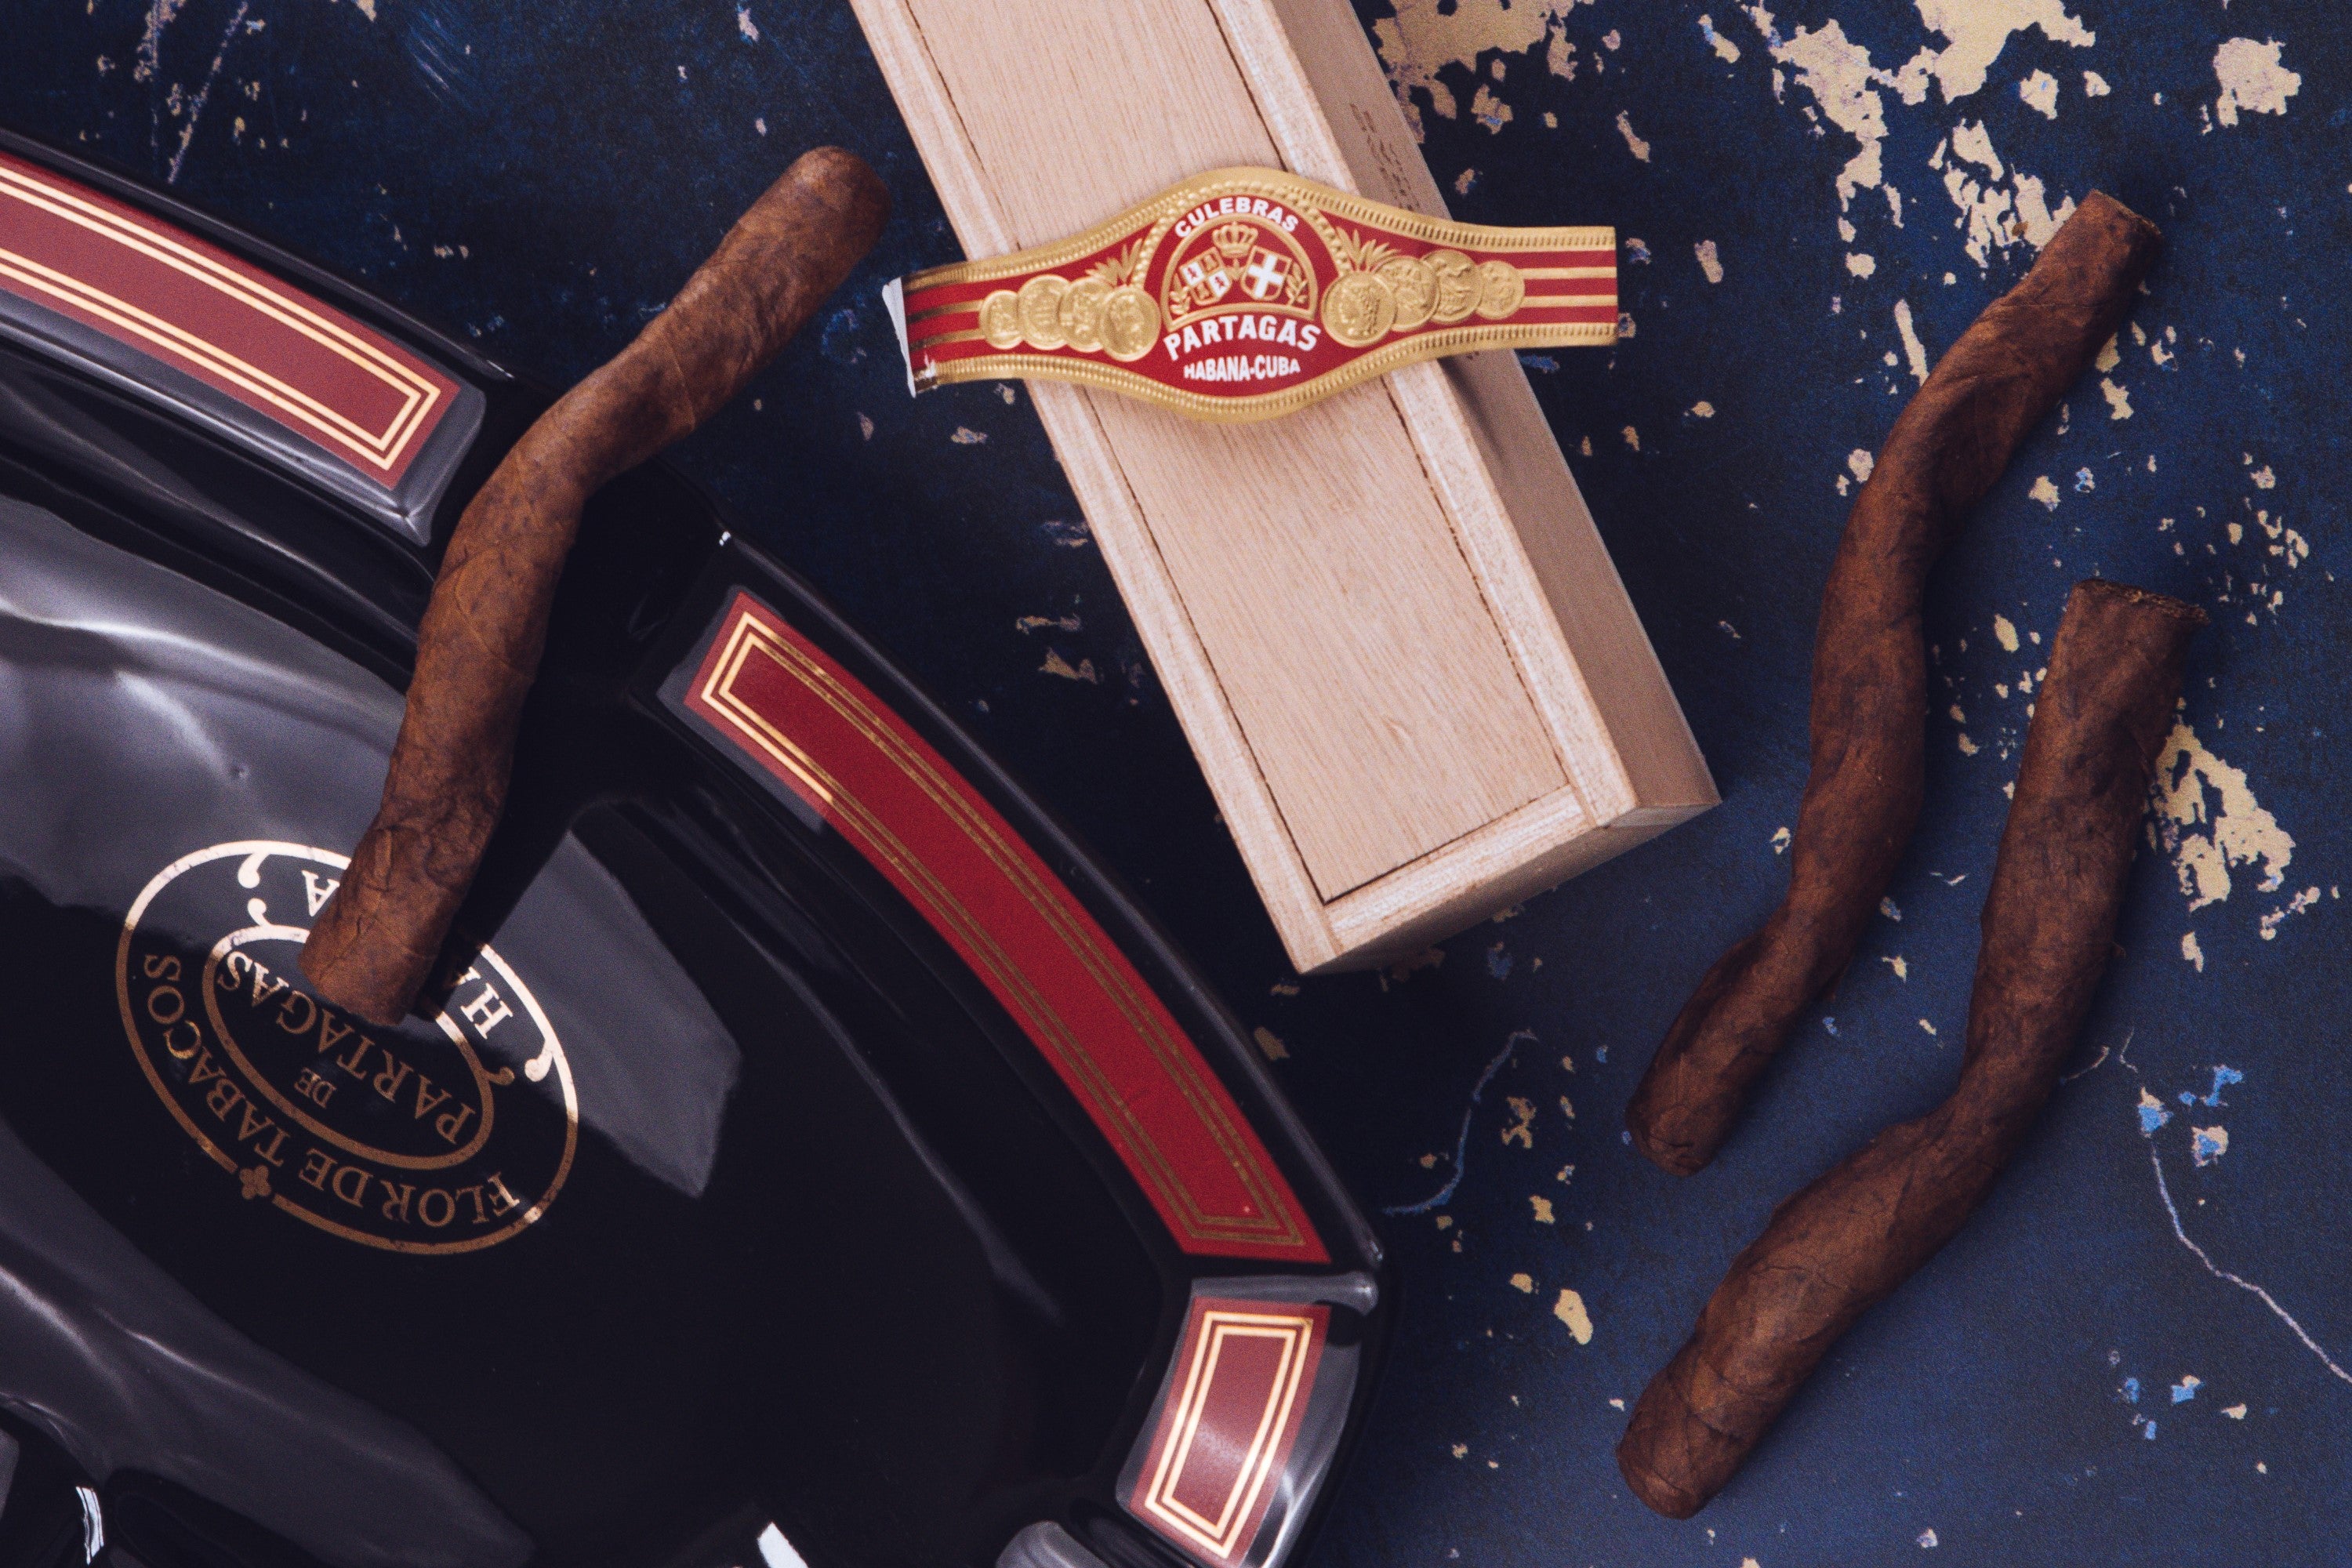 A trio of Partagas Culebras split and ready to be smoked.